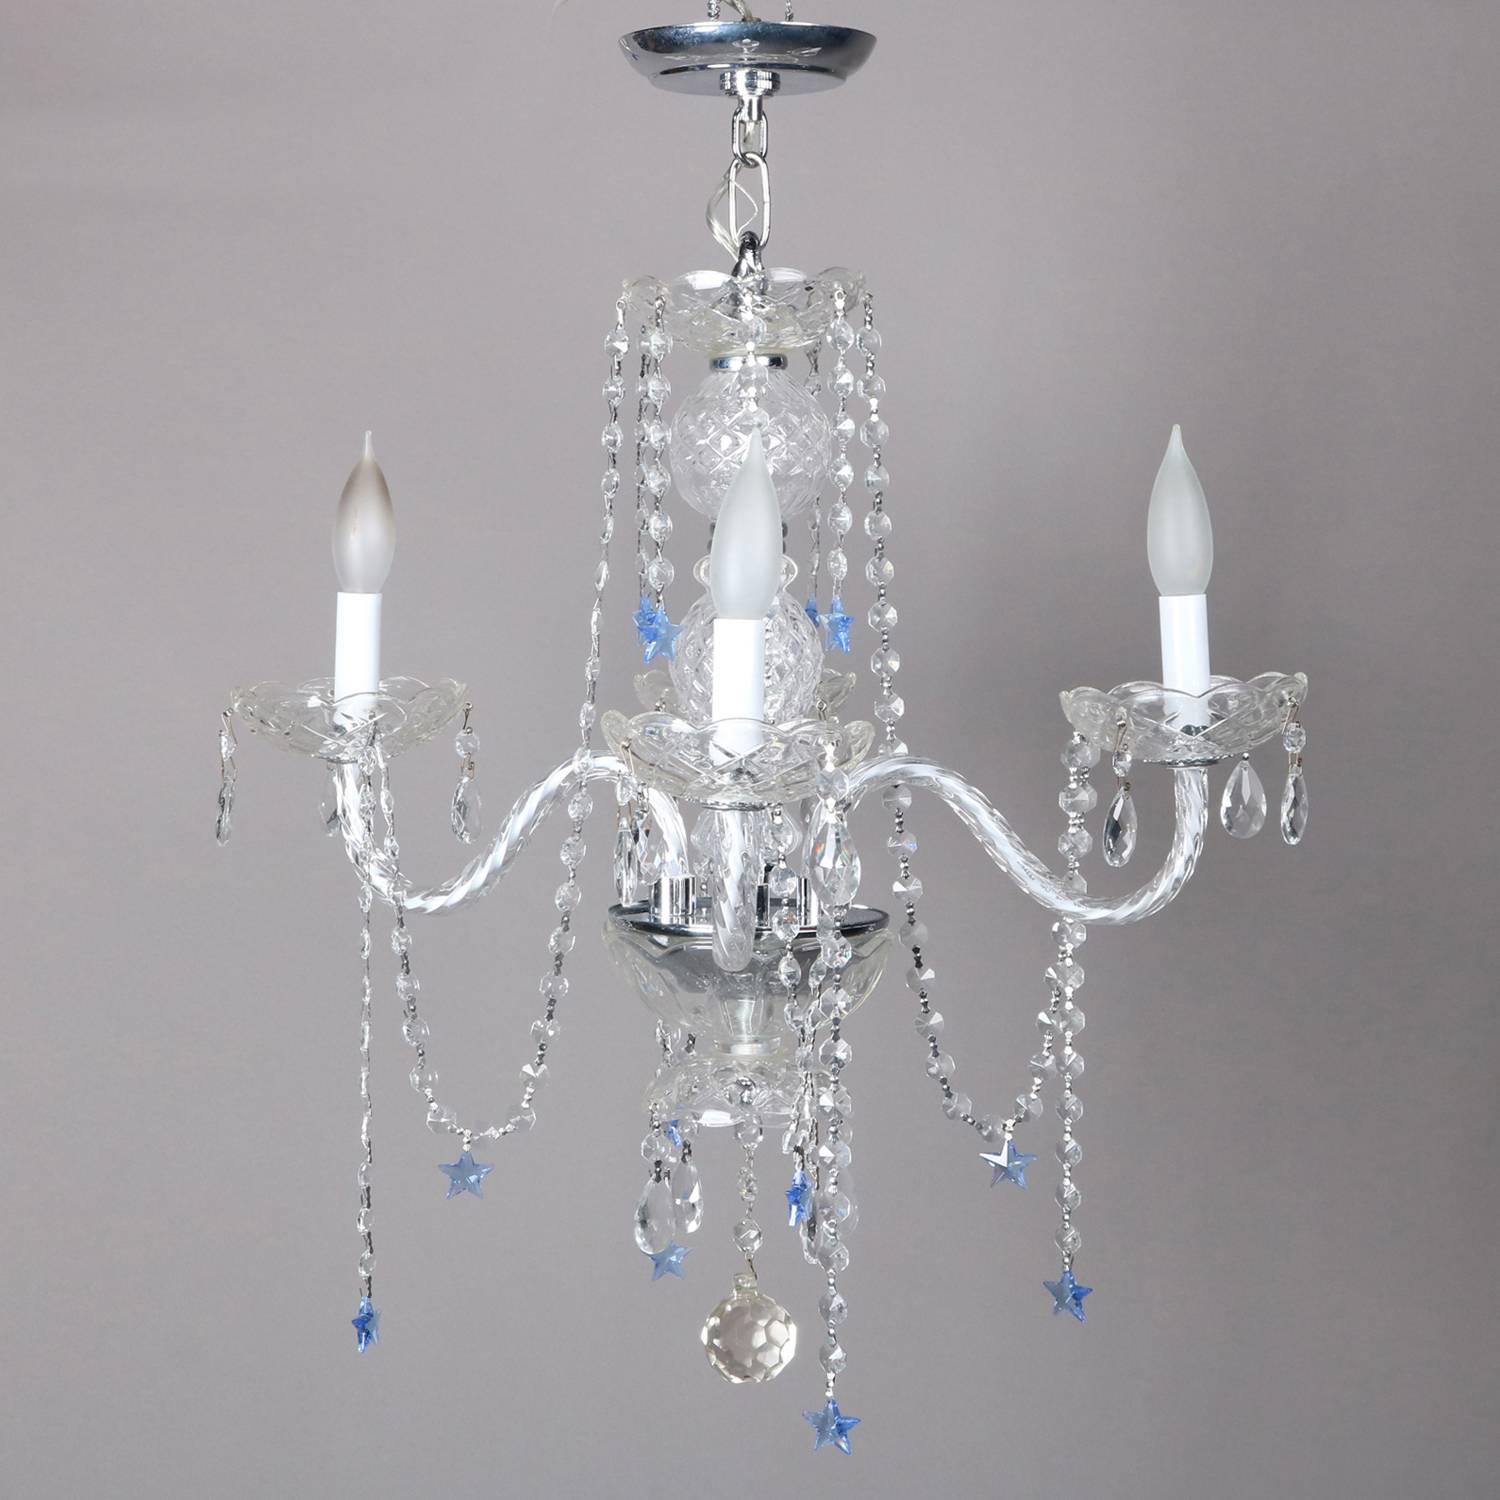 French style chandelier features crystal bodice with four glass arms terminating in candle lights, strung crystals throughout and highlighted with sapphire blue star cut crystals, 20th century

Measures - 25.25" drop from canopy x 22"diam